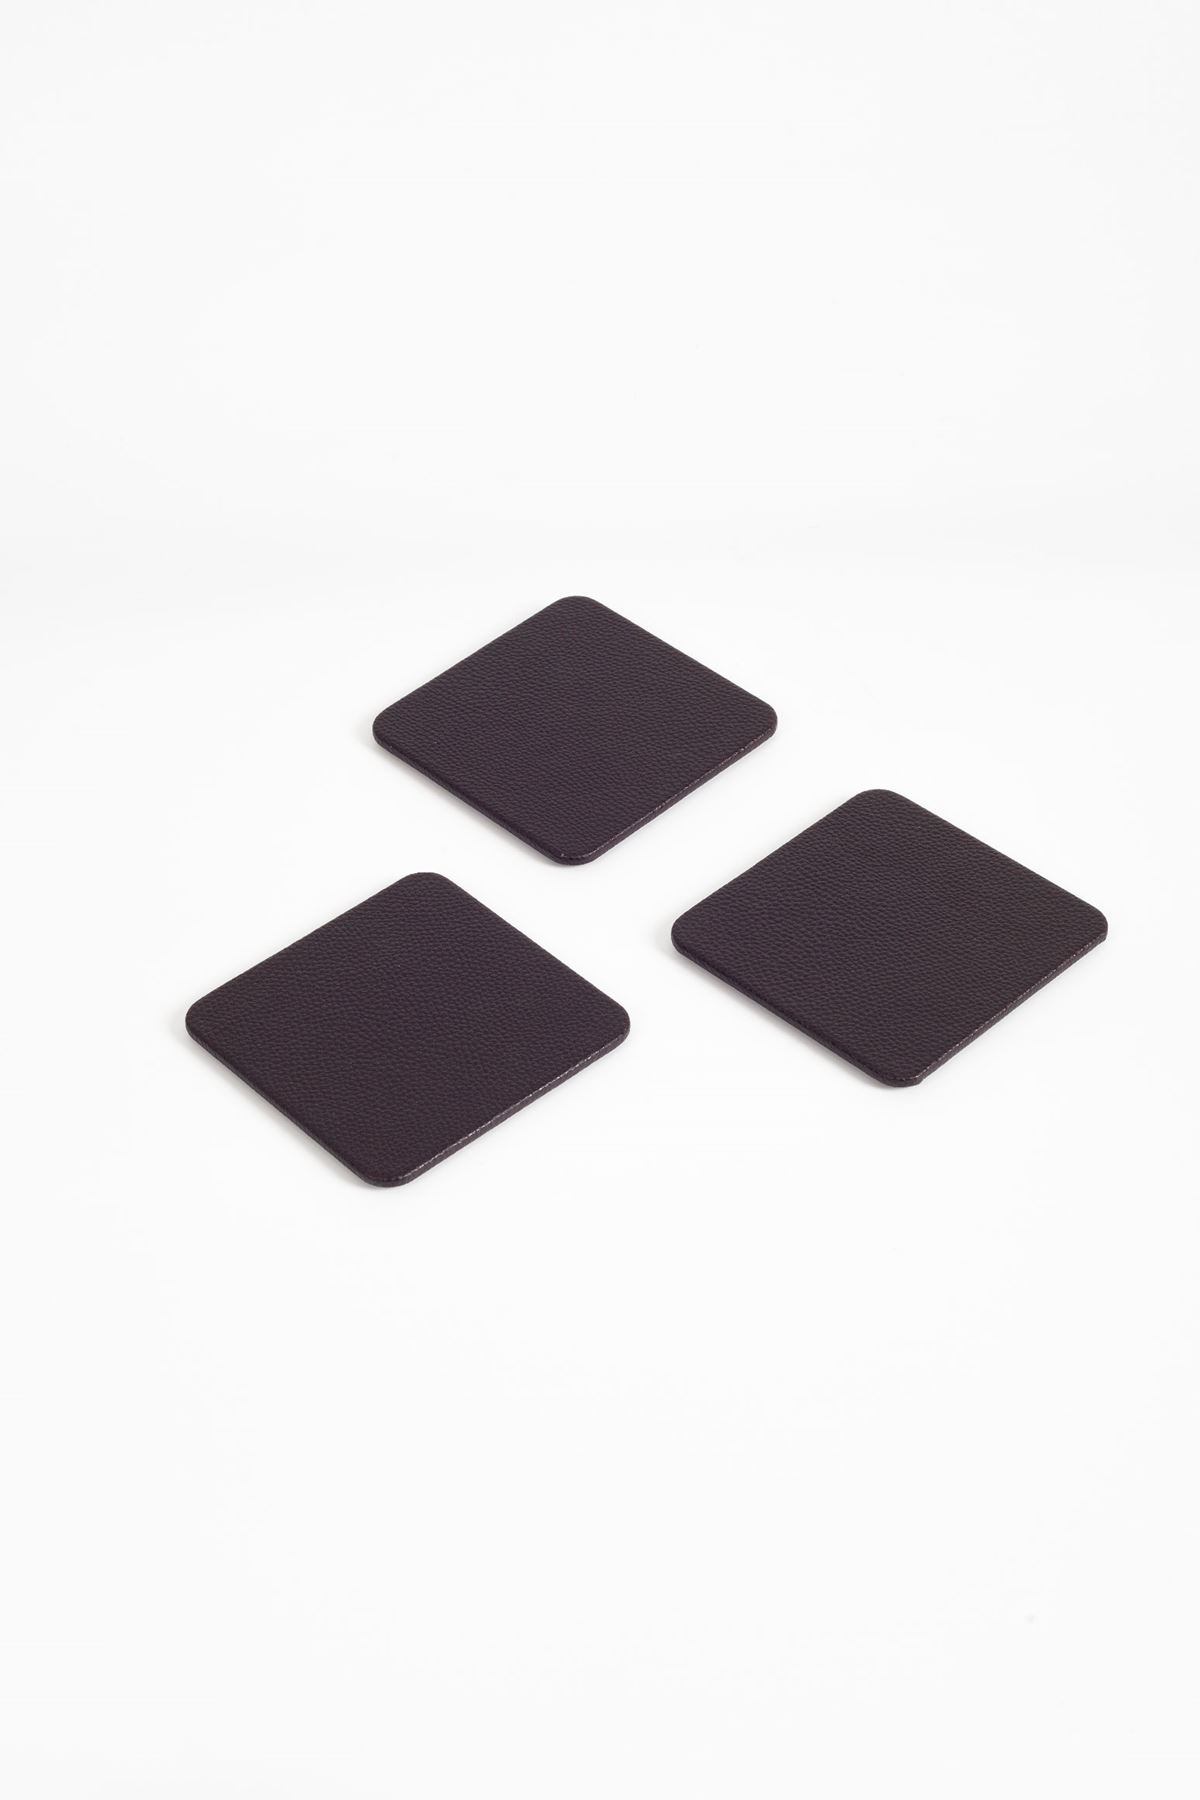 Brown Leather Square Coaster 3 Piece